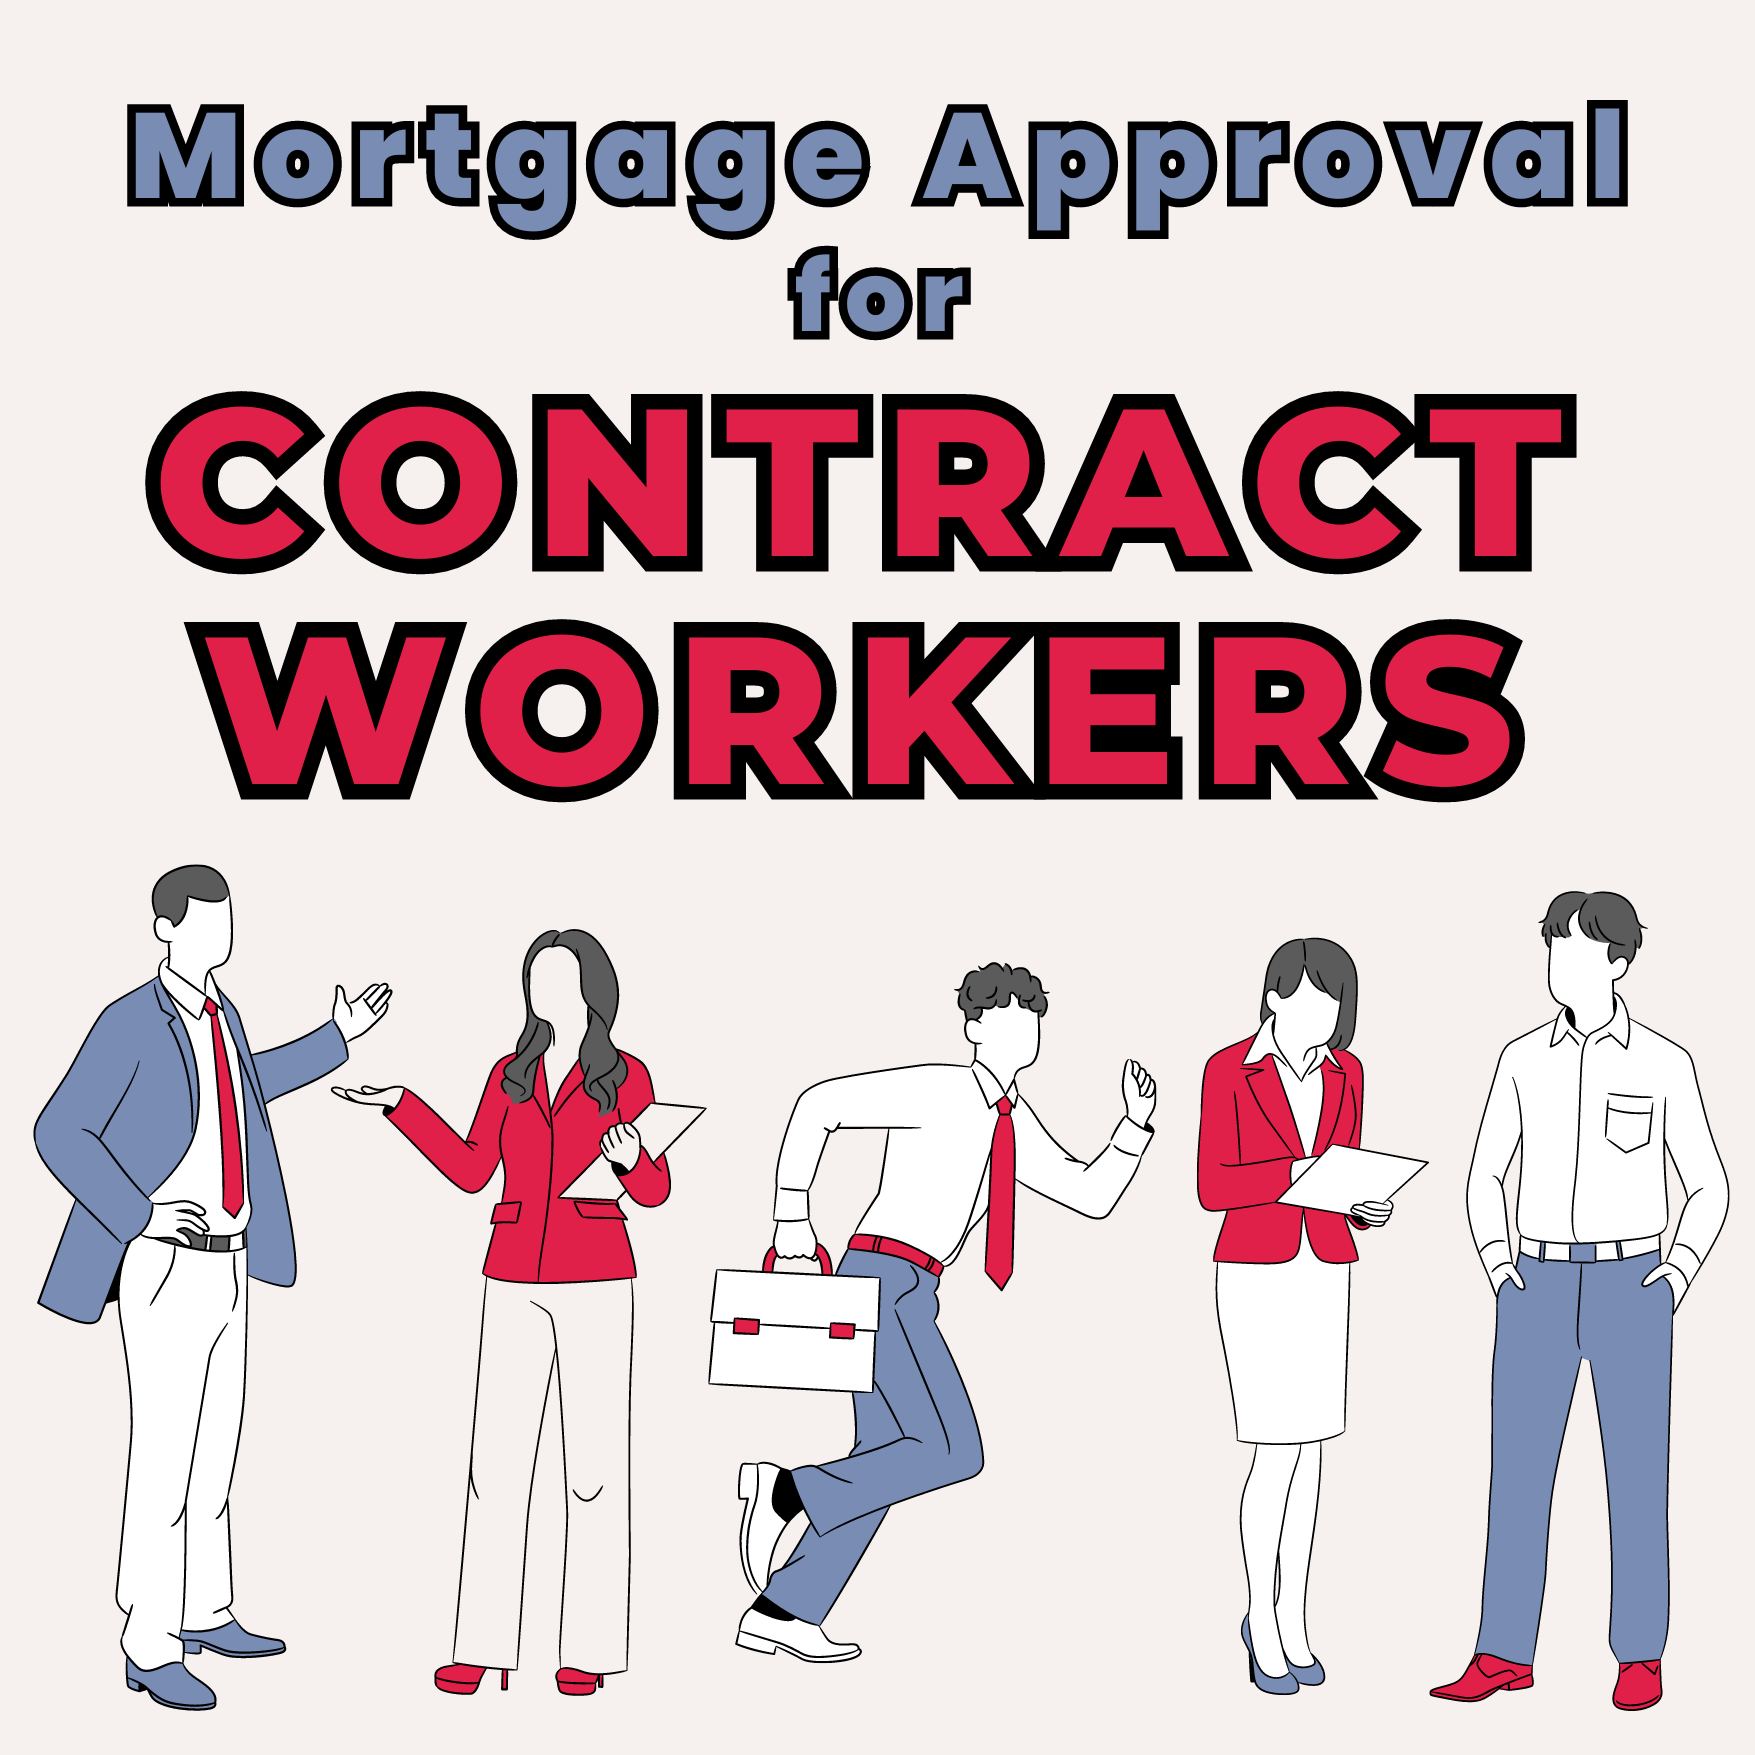 Mortgage Approval for Contract Workers